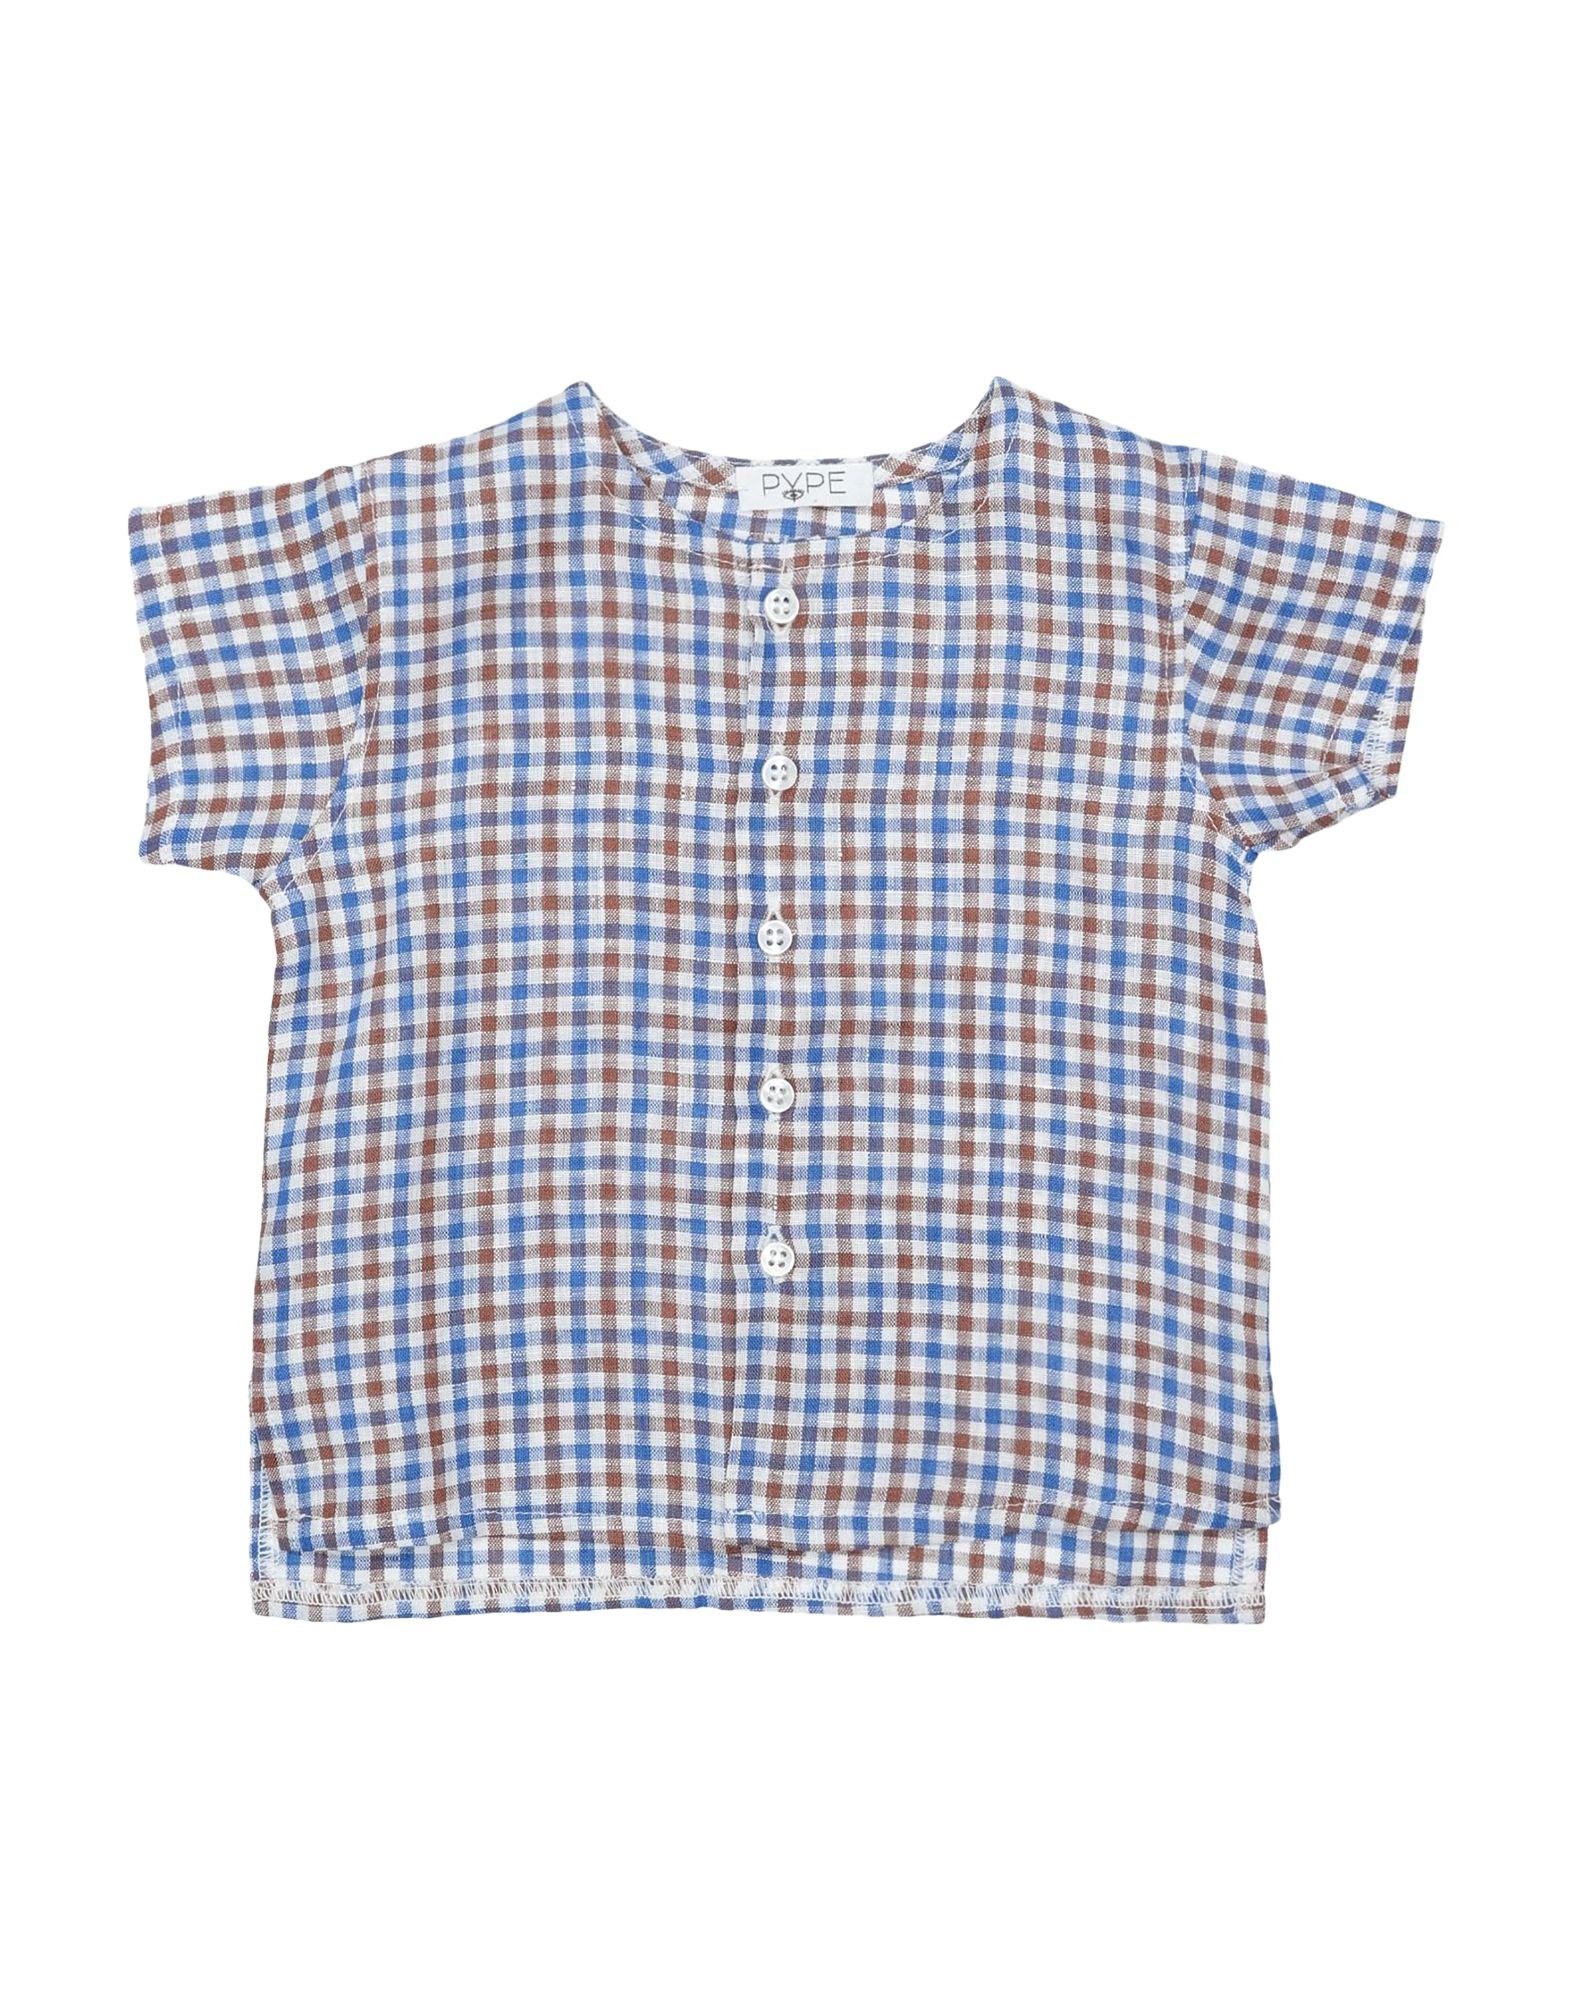 Pype Kids' Shirts In Blue